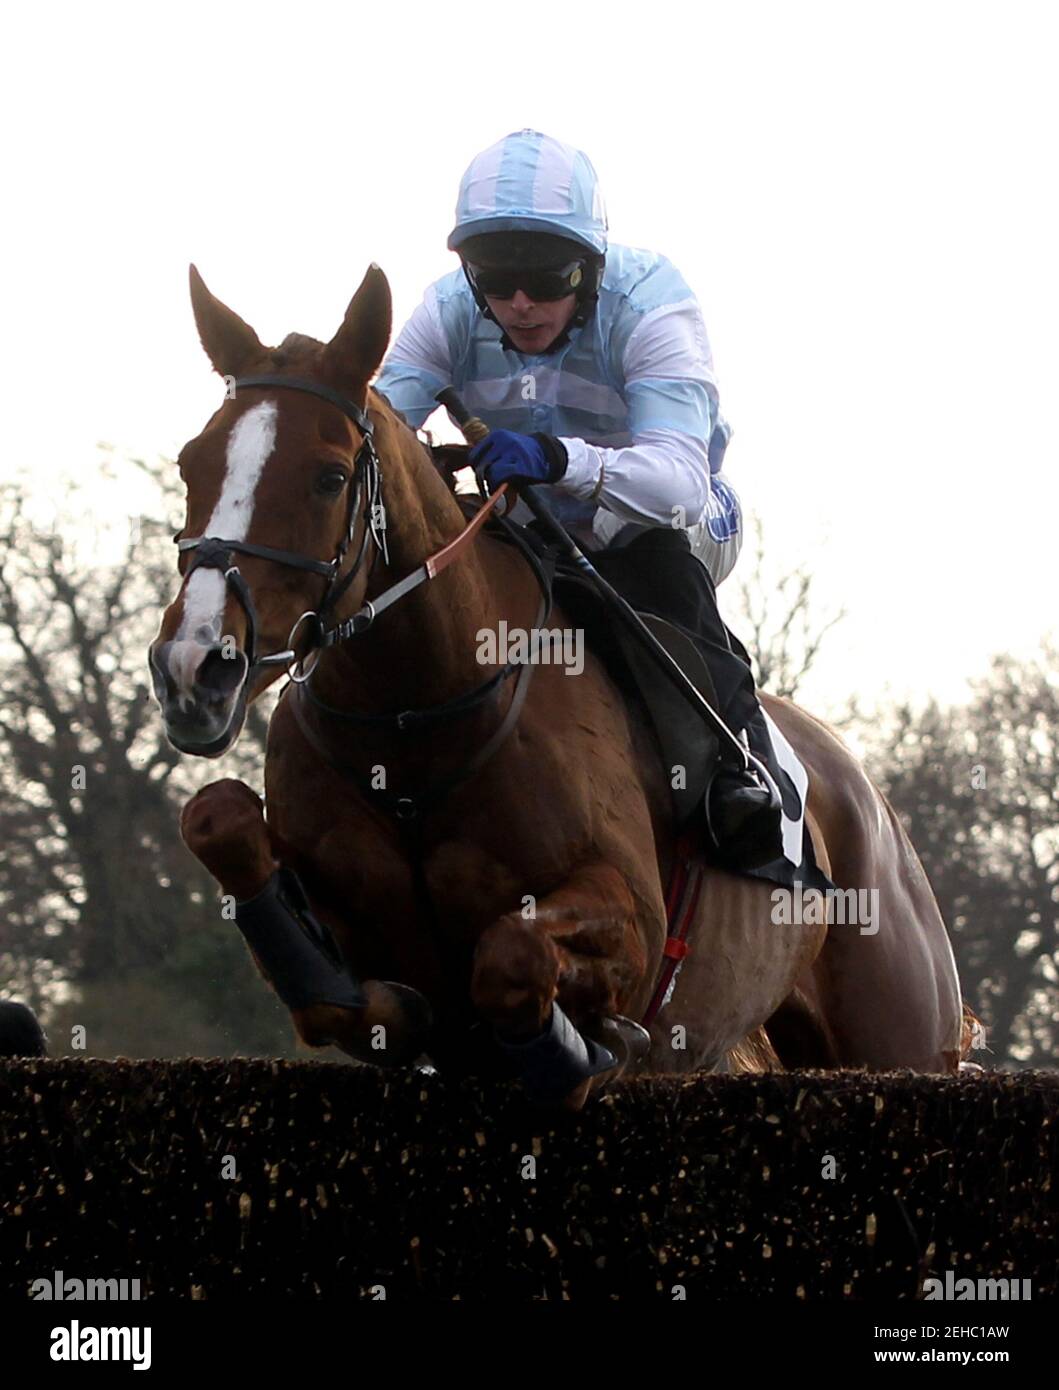 Horse Racing - Plumpton - Plumpton Racecourse - 2/1/11  Liam Treadwell and Tullamore Dew (L) before going on to win the 13.05 At The Races Sky 415 Novices' Steeple Chase Race  Mandatory Credit: Action Images / Julian Herbert  Livepic Stock Photo